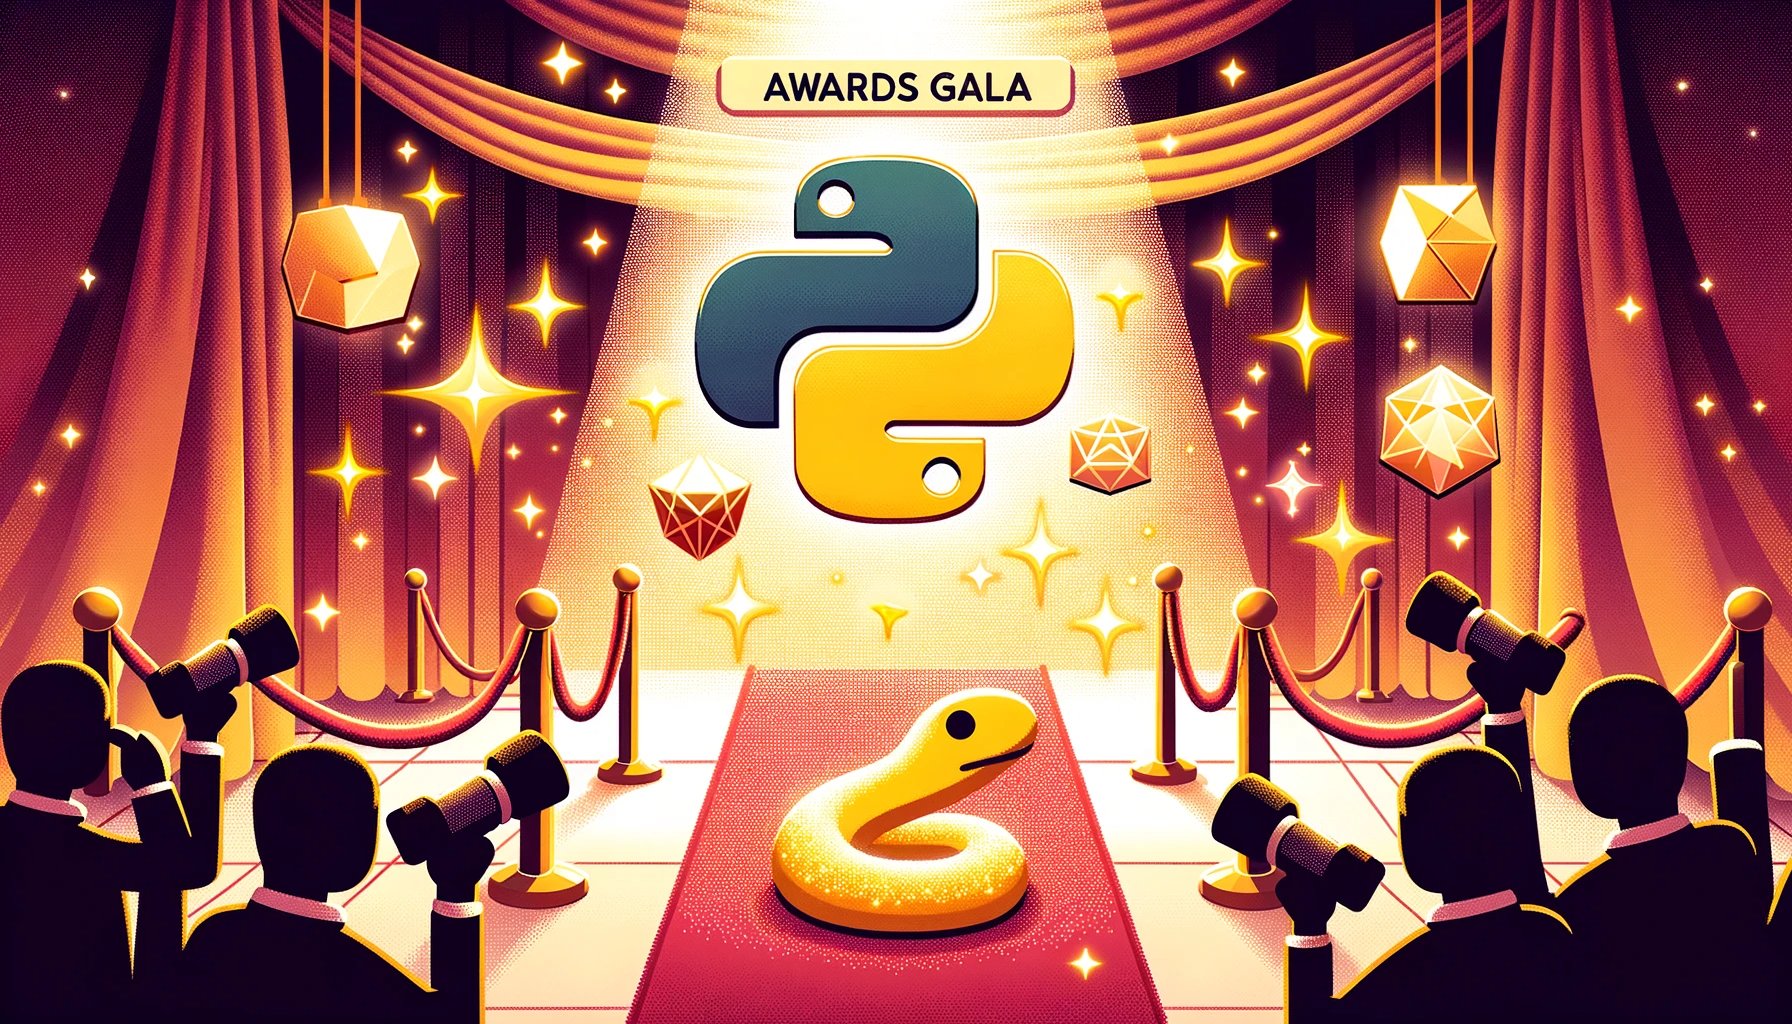 Illustration of a red carpet event with a twist. A Python logo floats above the carpet surrounded by golden sparkles, followed by a glowing JavaScript